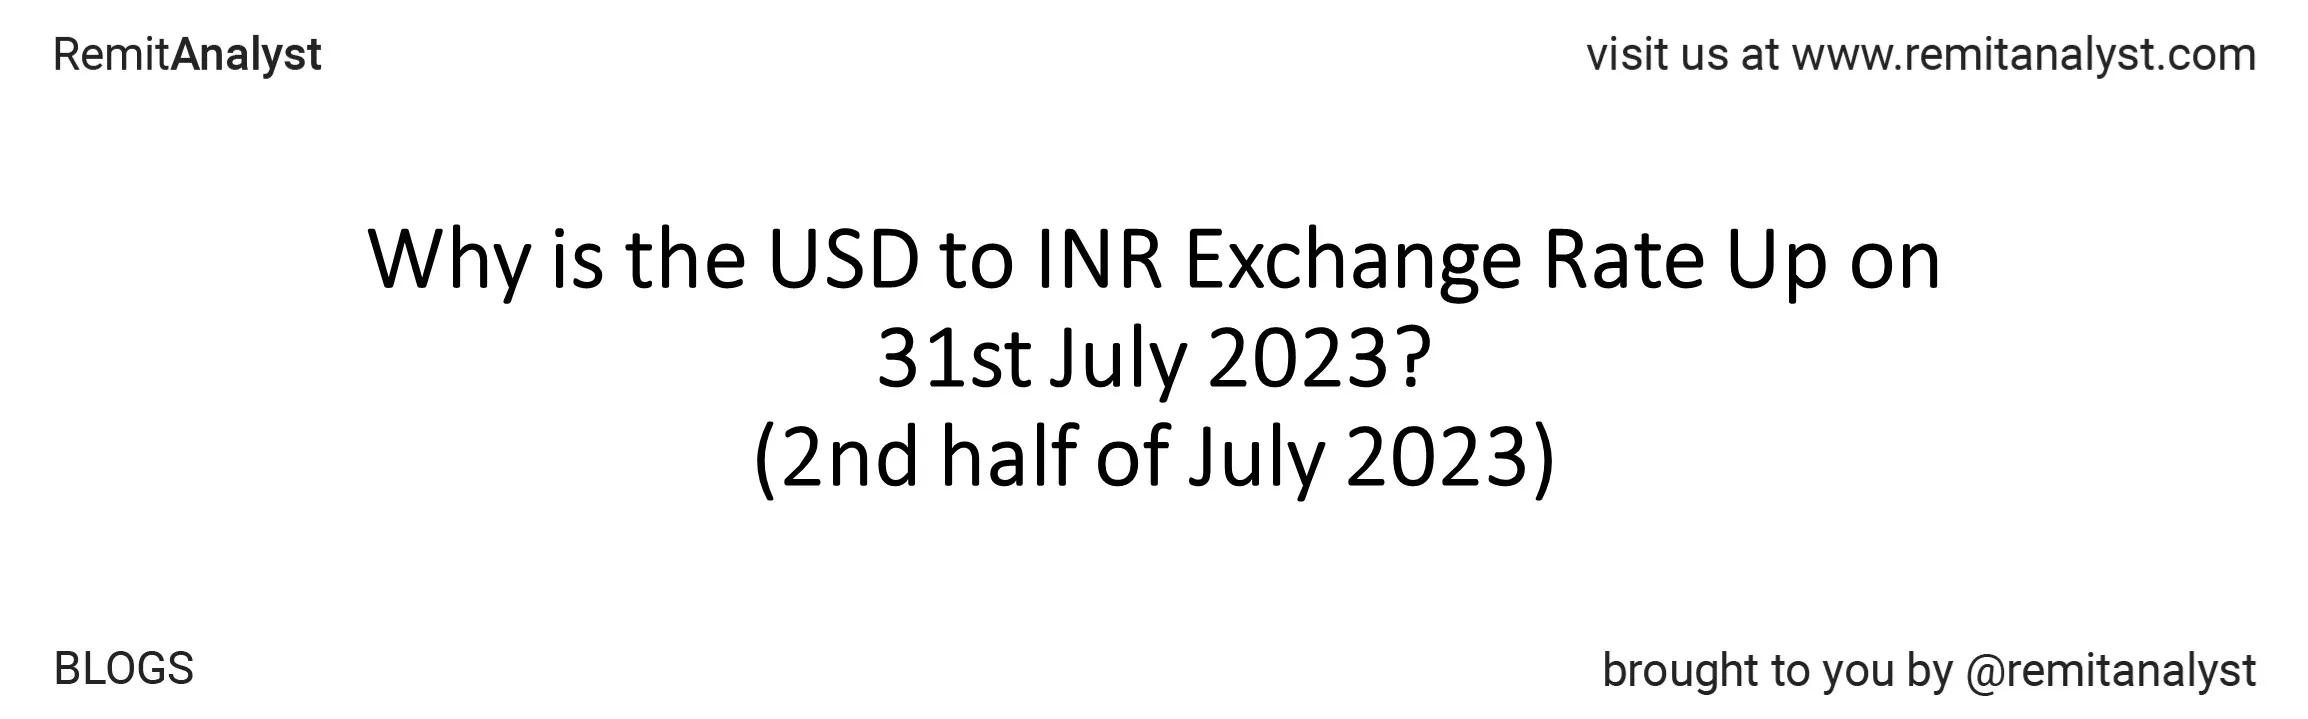 usd-to-inr-exchange-rate-17-jul-2023-to-31-jul-2023-title